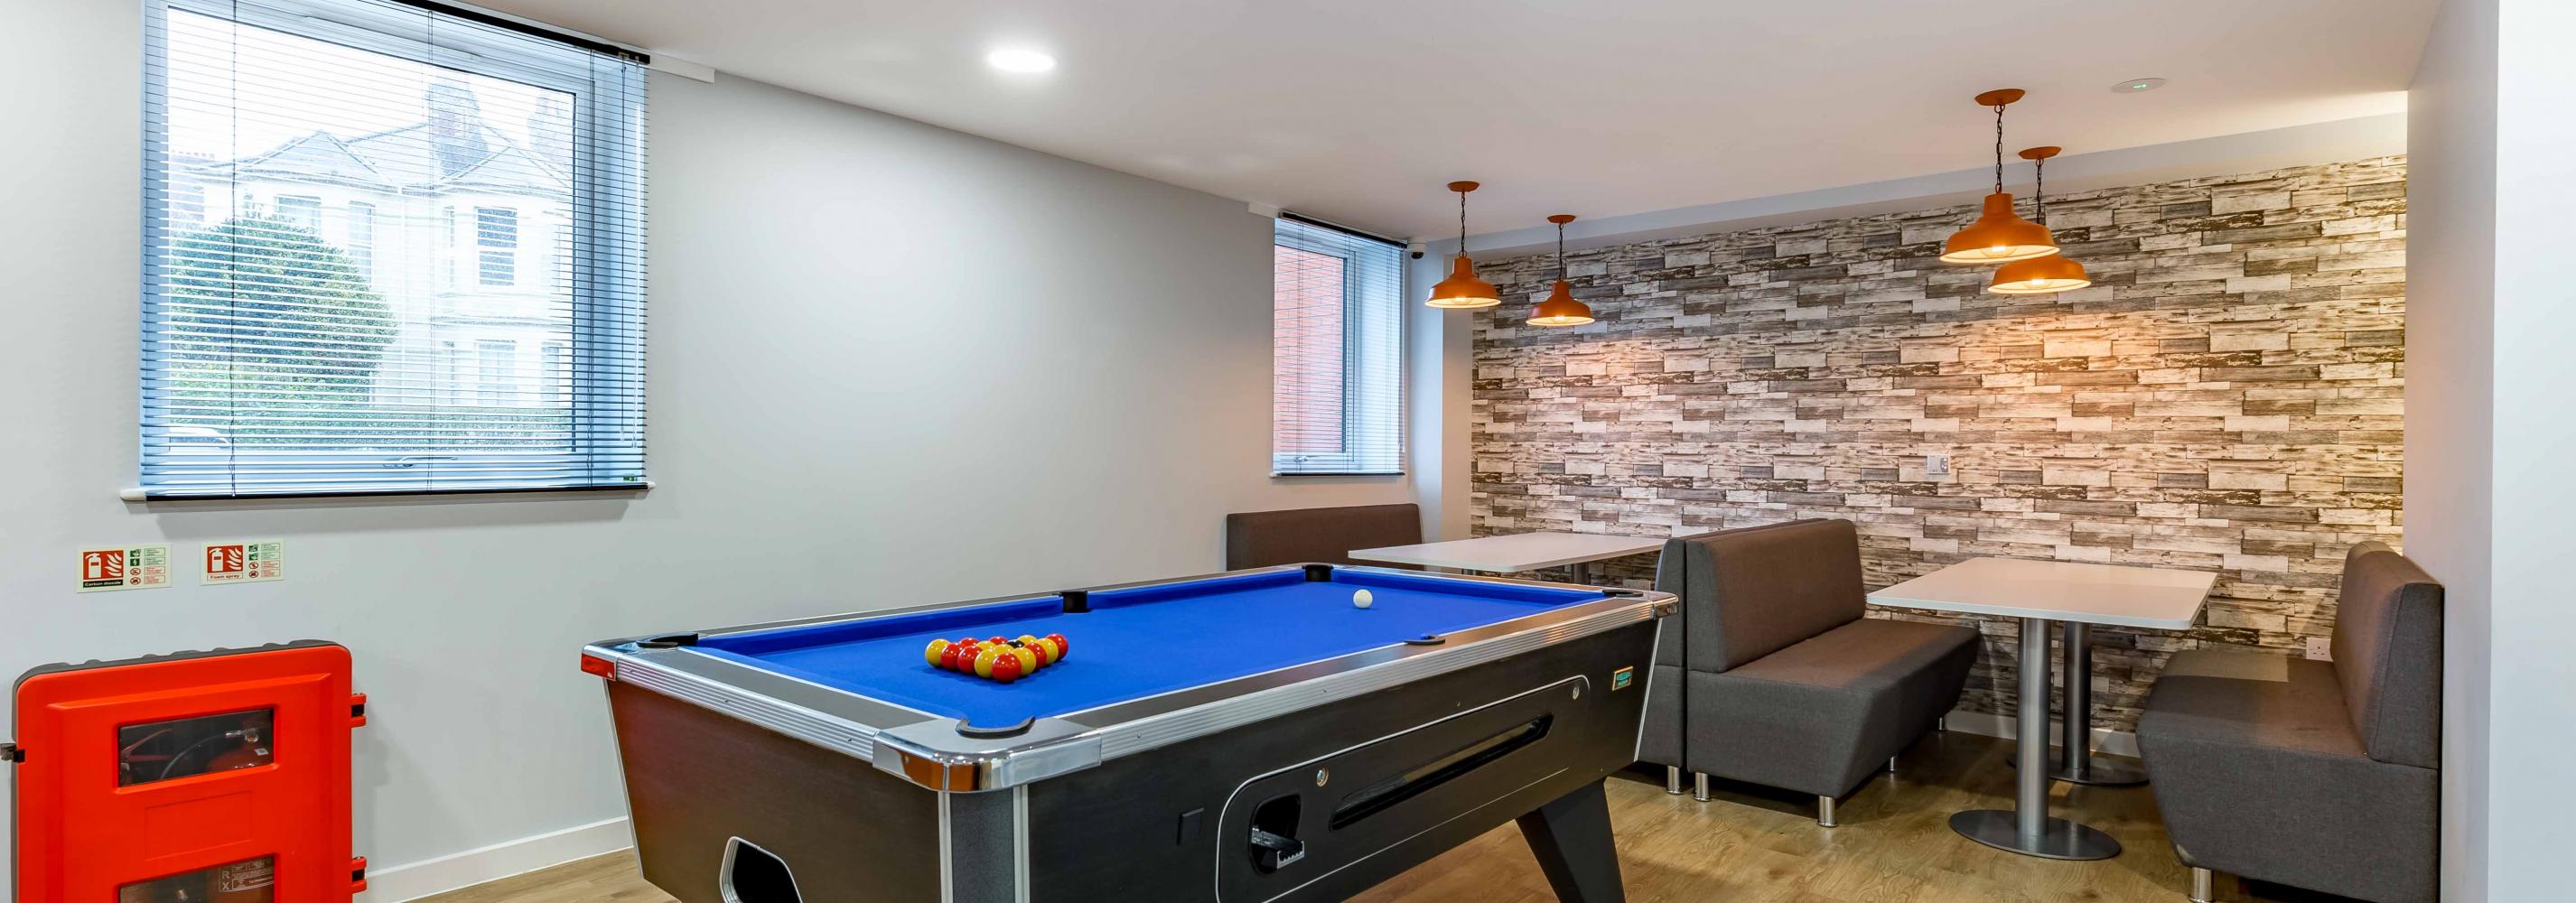 Communal room with pool table 